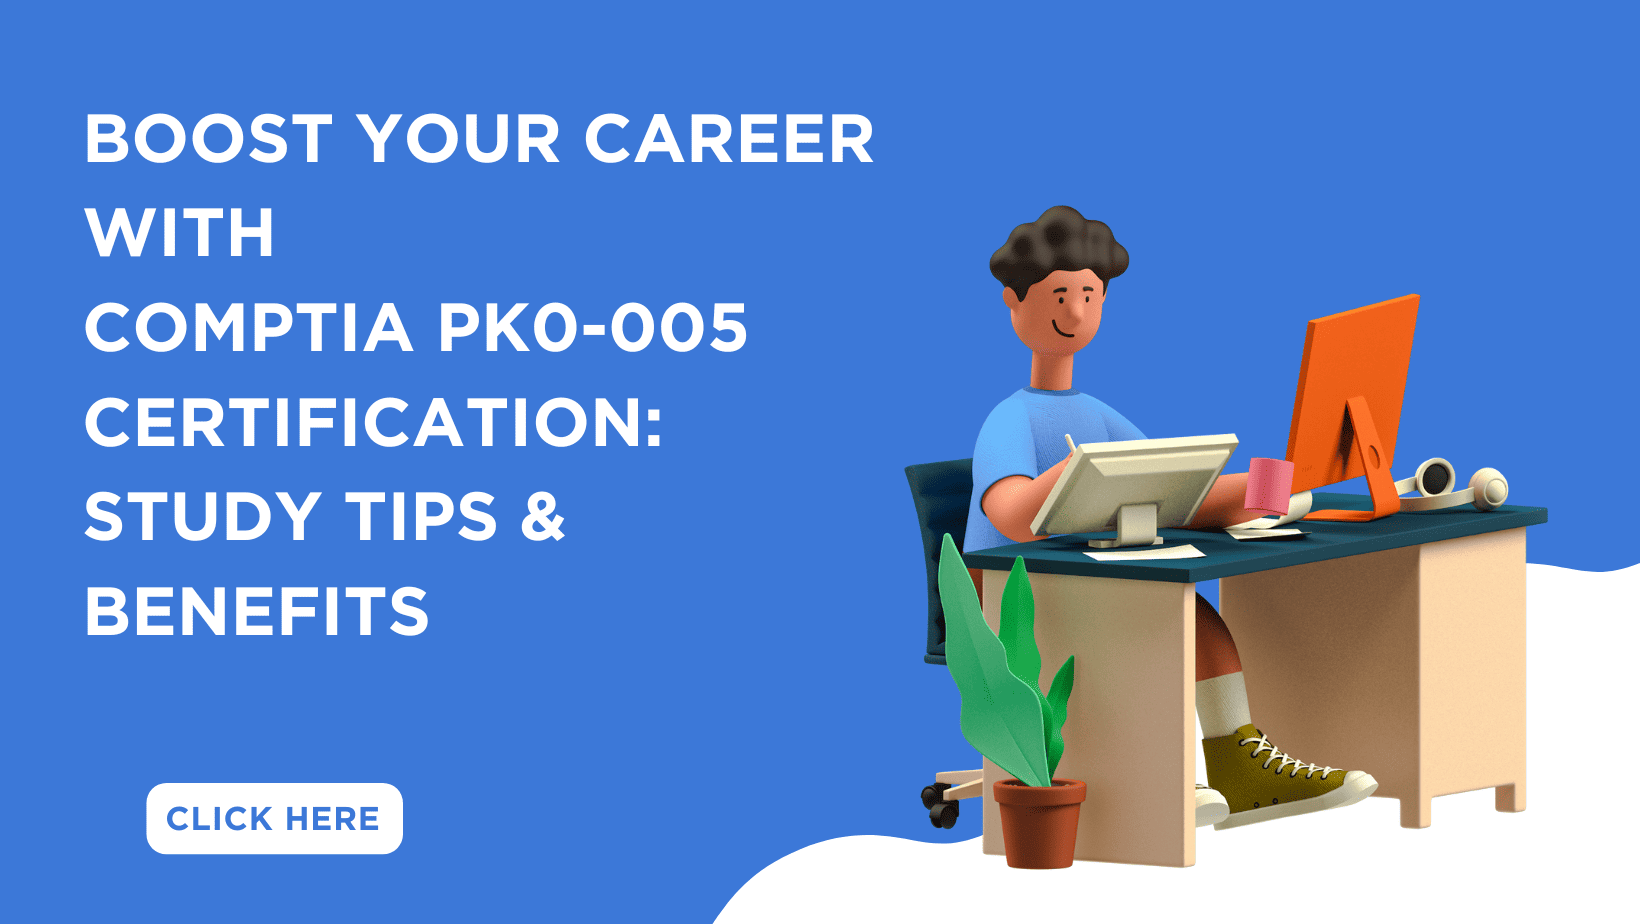 Ace the CompTIA Project+ PK0-005 exam with effective study tips. Enhance skills, boost confidence, and unlock career opportunities.